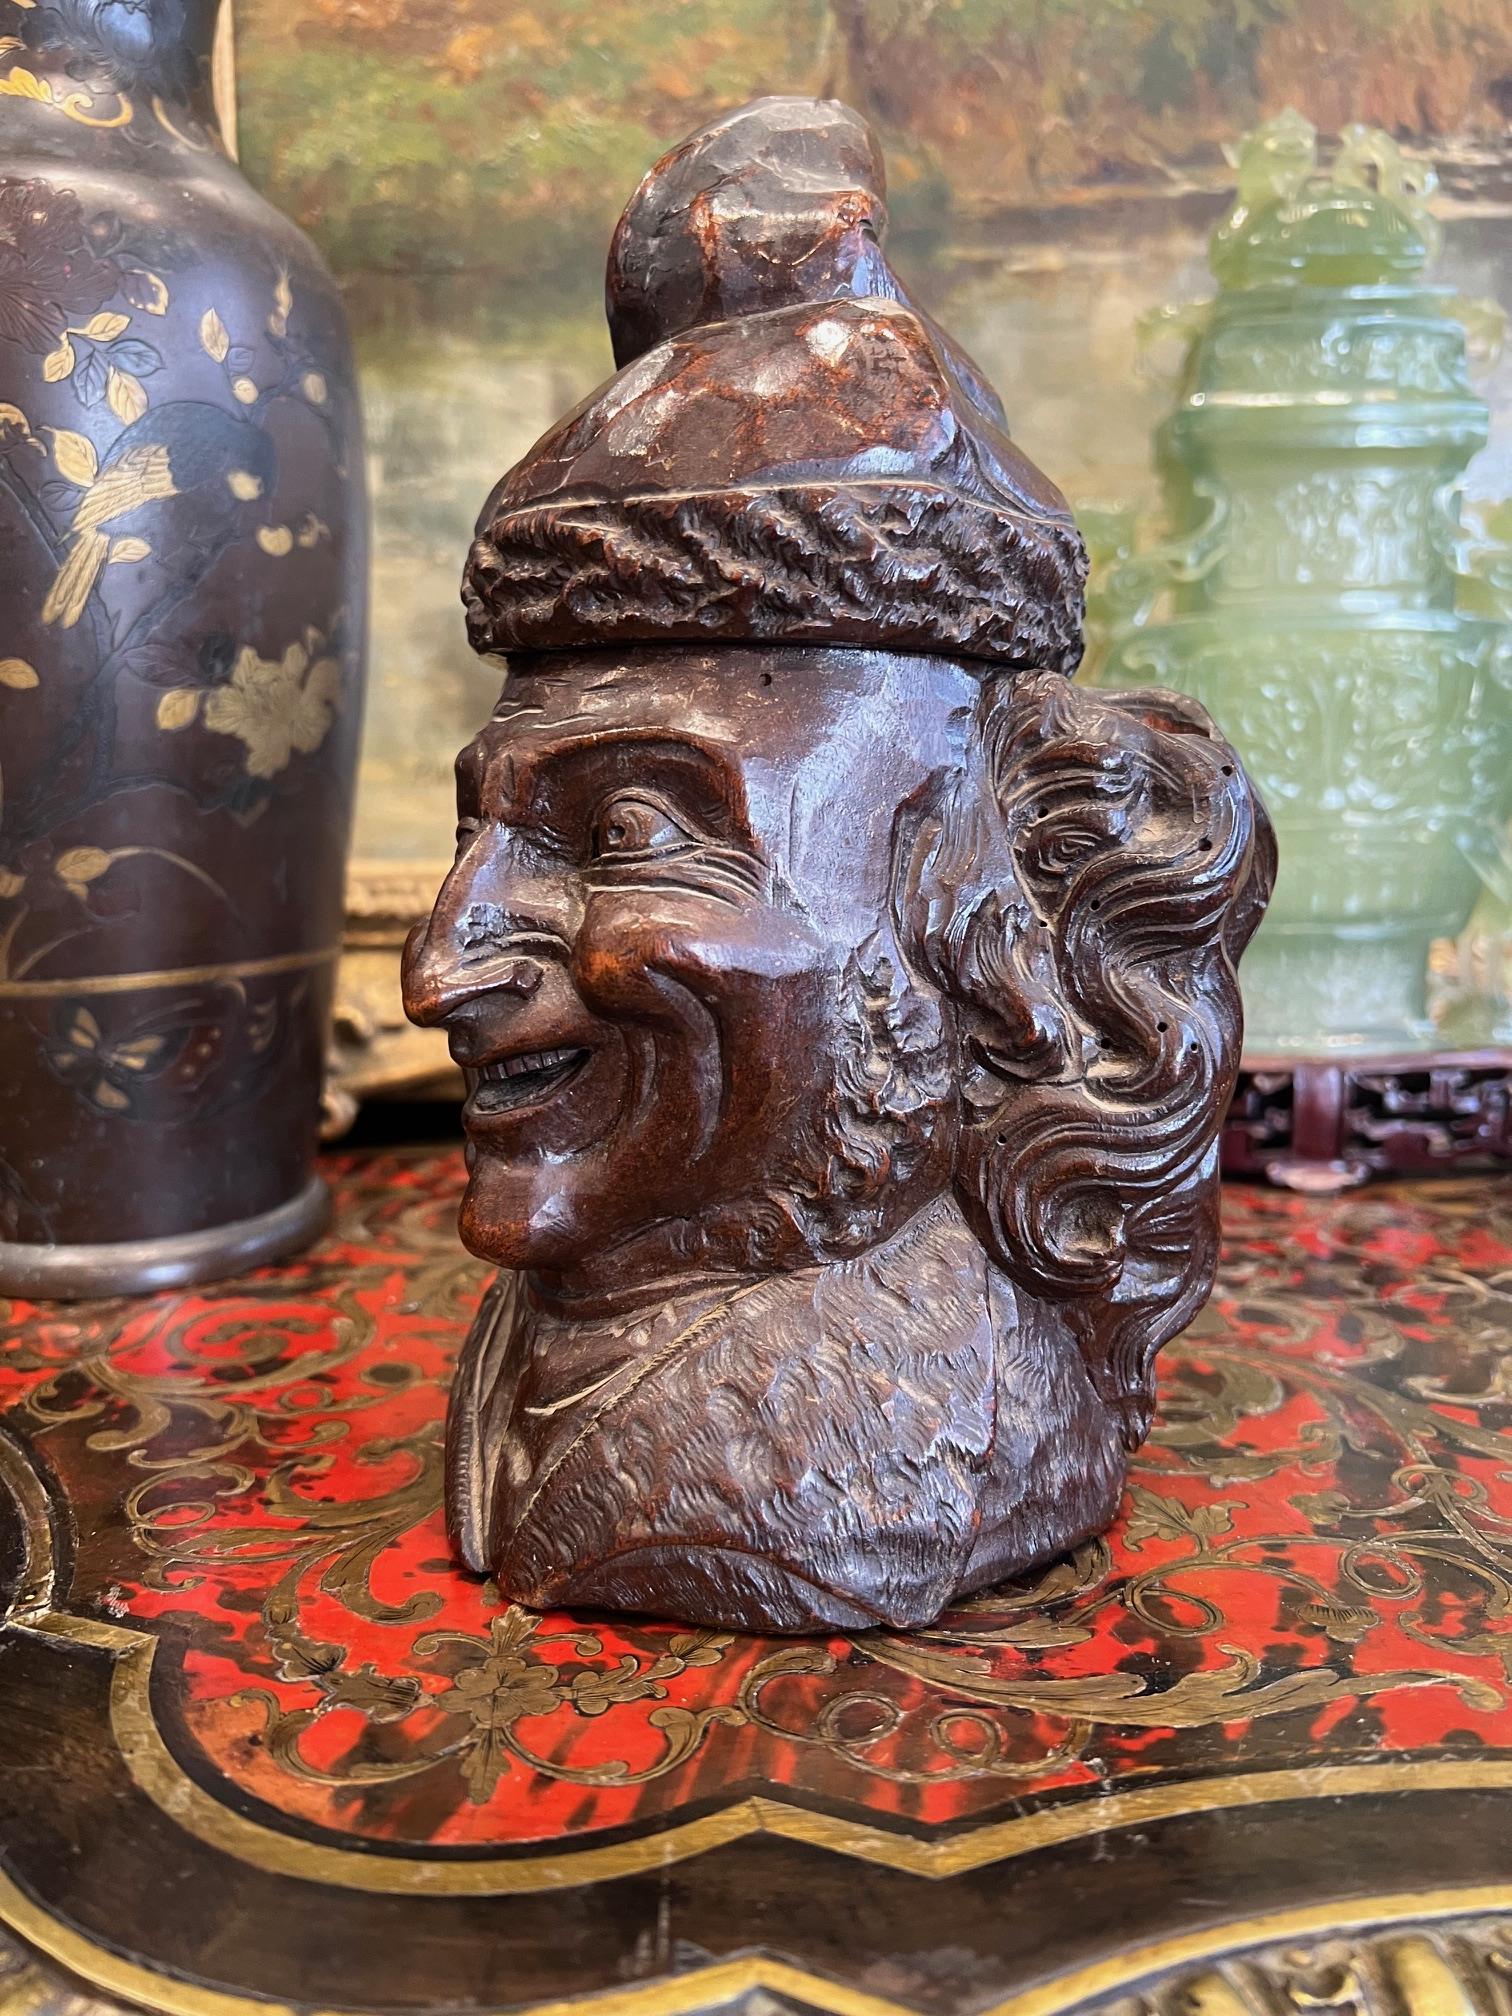 A LATE 19TH CENTURY BLACK FOREST CARVED WOOD TOBACCO JAR IN THE FORM OF VOLTAIRE - Image 4 of 4